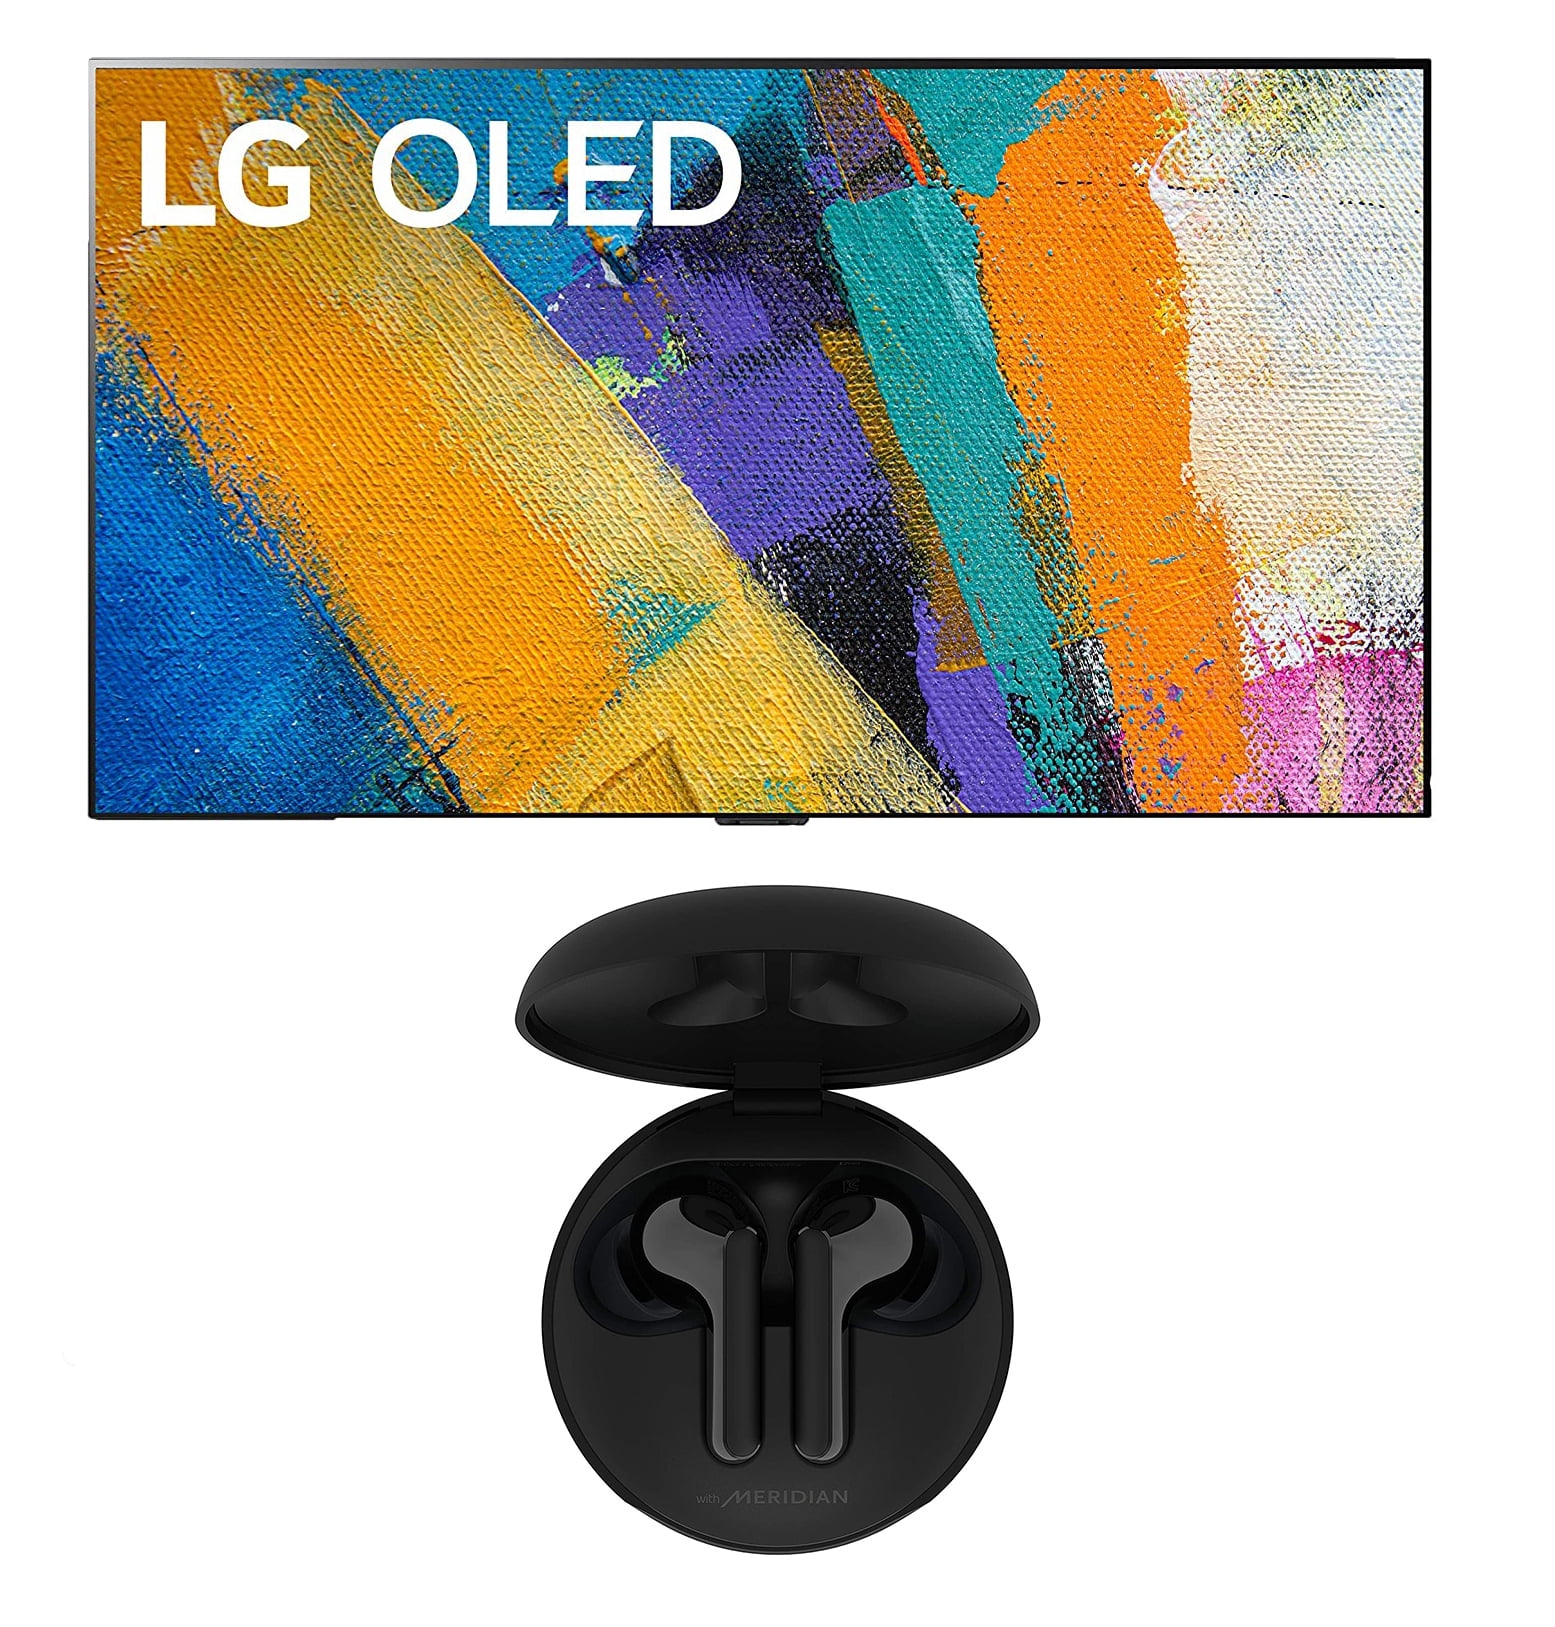 LG OLED55GXP 55" OLED Gallery Design Smart 4K Ultra High Definition TV with LG Tone Free HBS-FN6-BLACK Bluetooth Wireless In-Ear Earbuds (2020)